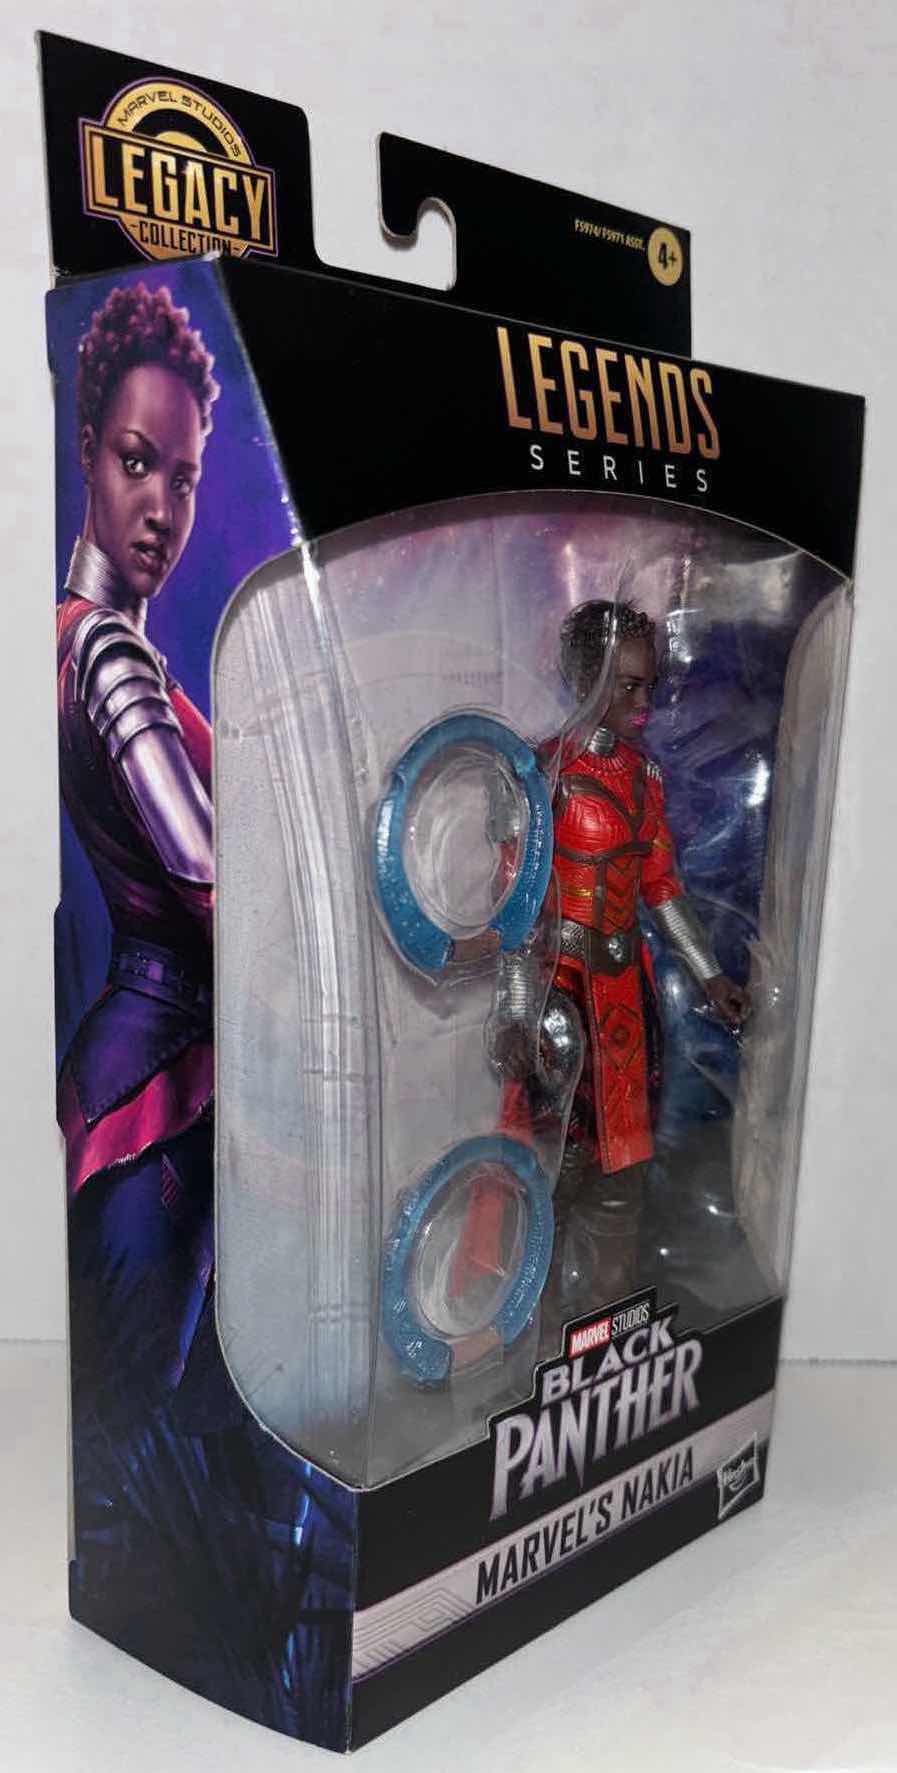 Photo 2 of NEW 2-PACK HASBRO MARVEL STUDIOS LEGACY COLLECTION LEGENDS SERIES BLACK PANTHER ACTION FIGURE & ACCESSORIES, “MARVEL’S NAKIA”